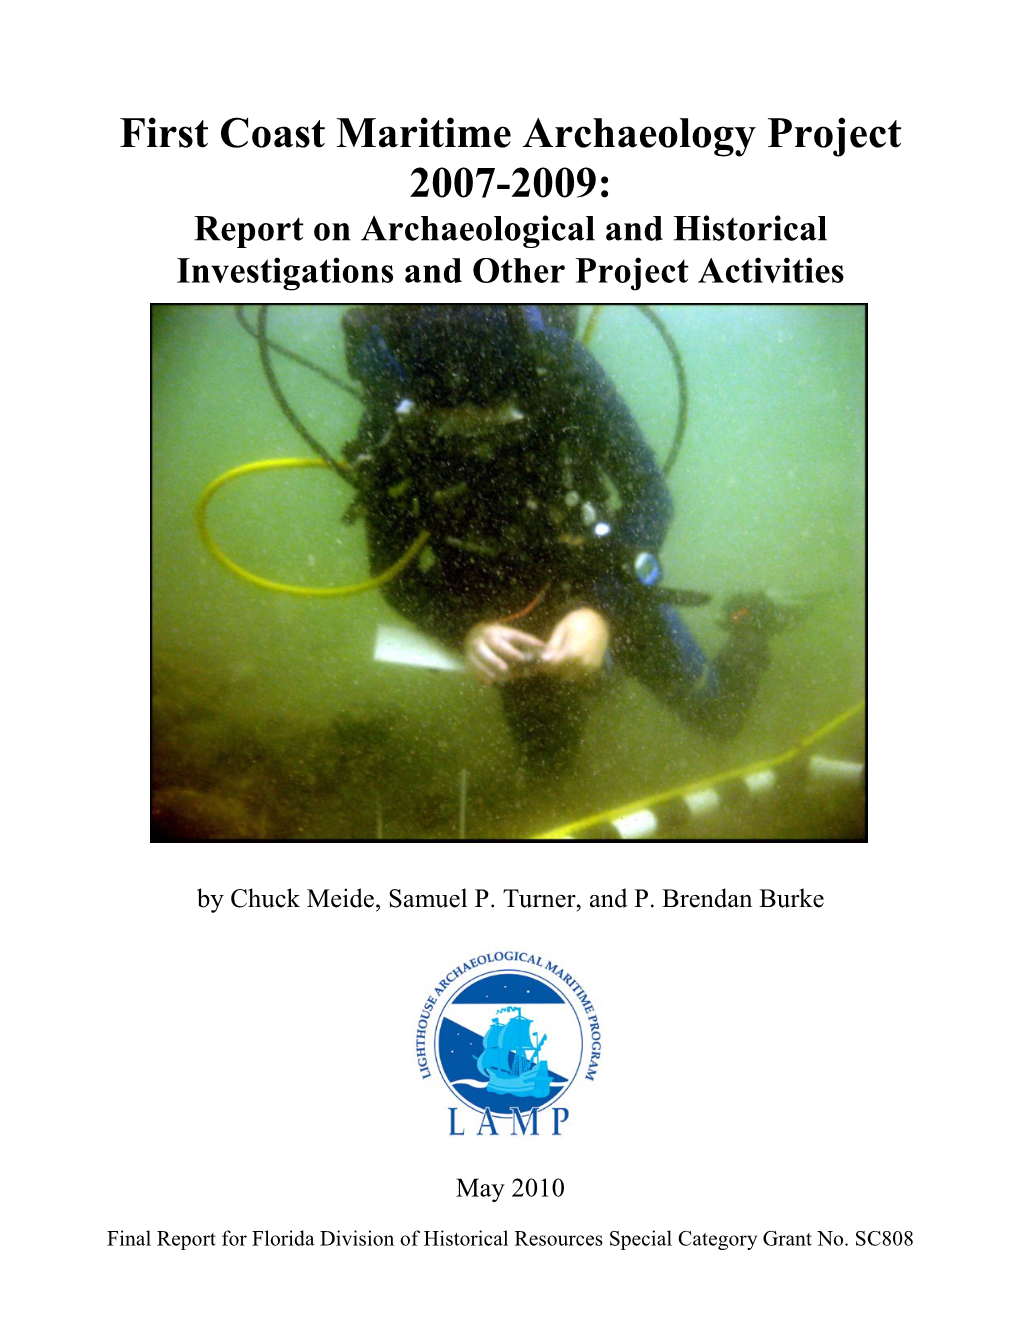 First Coast Maritime Archaeology Project 2007-2009: Report on Archaeological and Historical Investigations and Other Project Activities